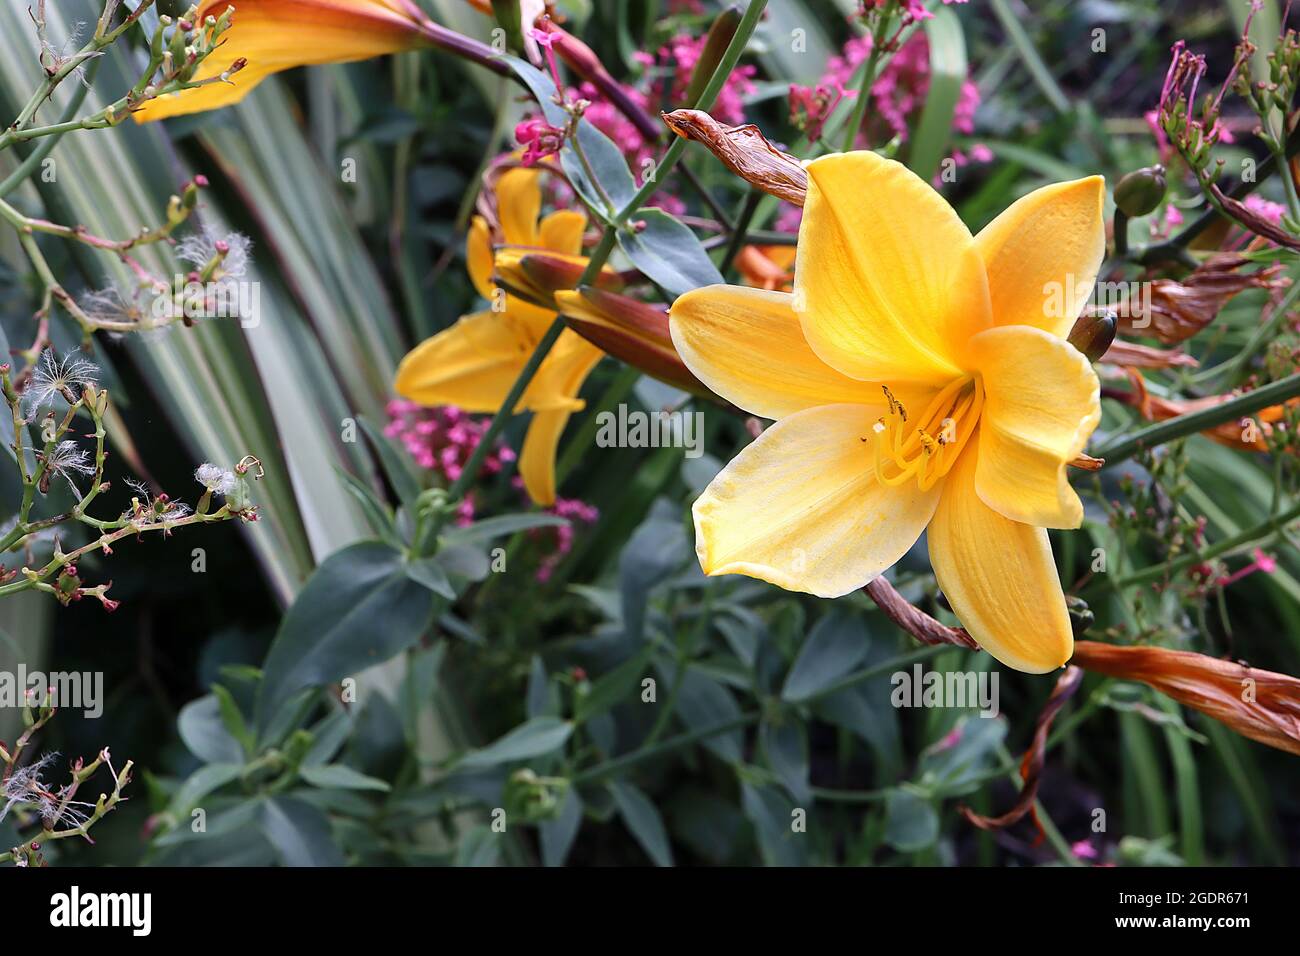 Hemerocallis ‘Hyperion’ daylily Hyperion – funnel-shaped yellow flowers with white margins and midrib, July, England, UK Stock Photo